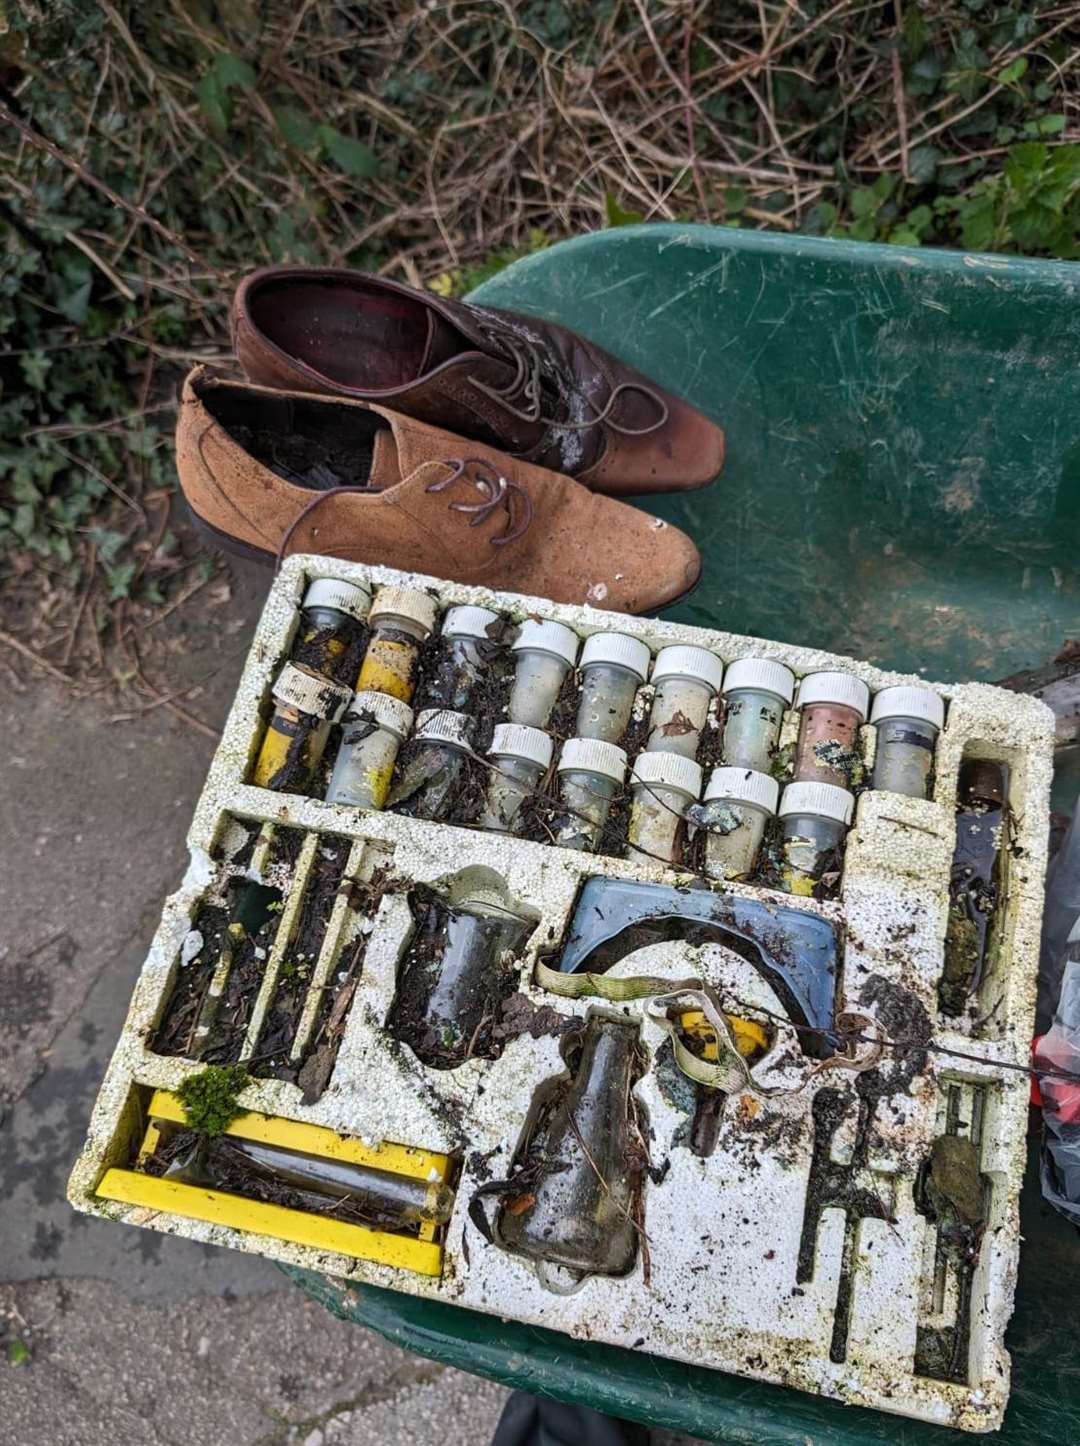 A science kit was pulled from the river along with a pair of shoes. Photo: Jo Hill